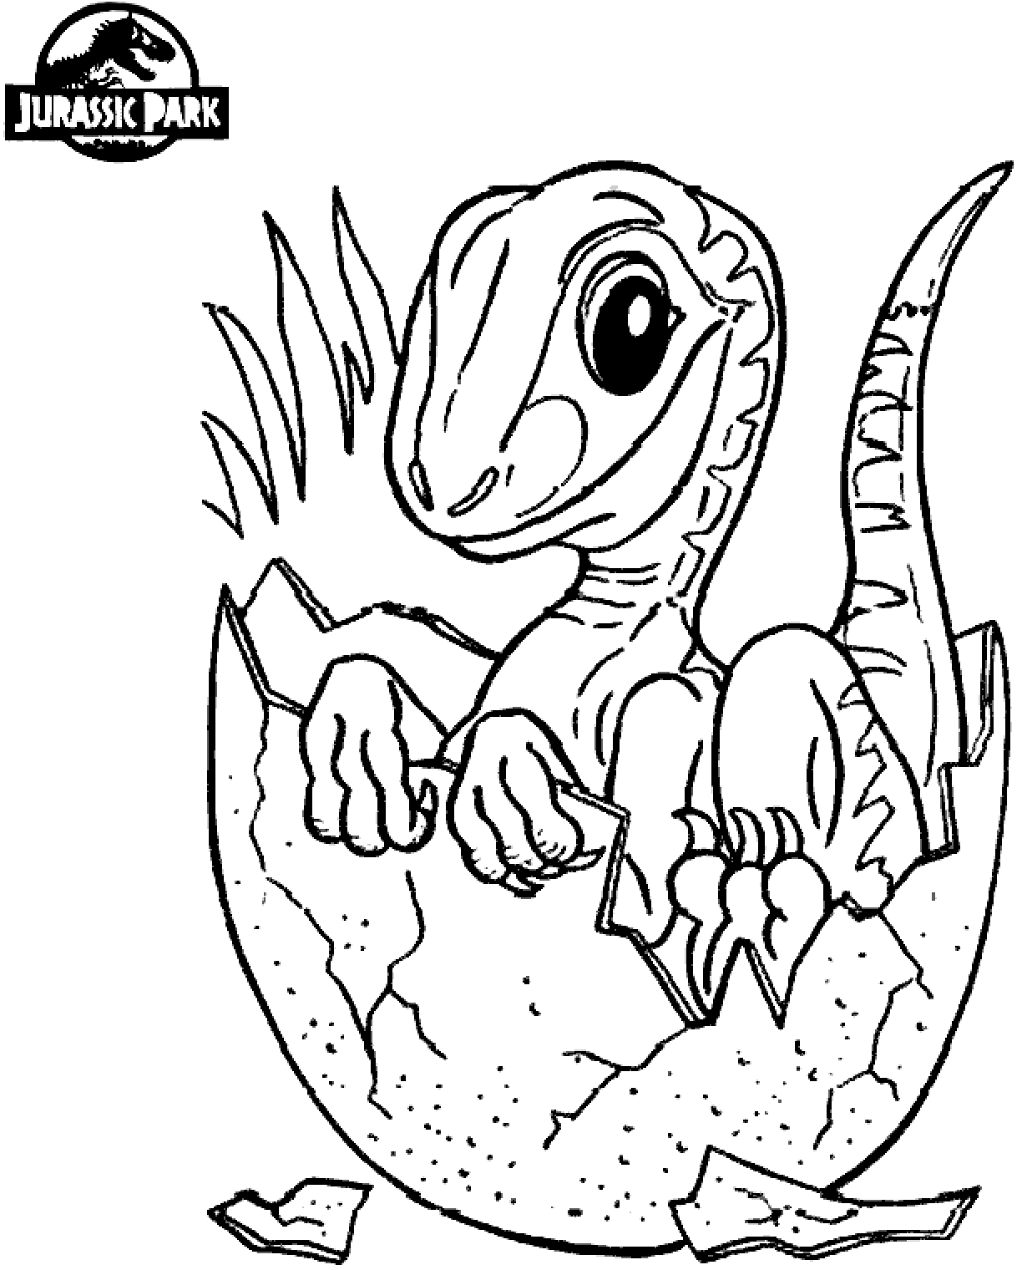 Baby Dinosaur In Jurassic World Coloring Page - Free ...